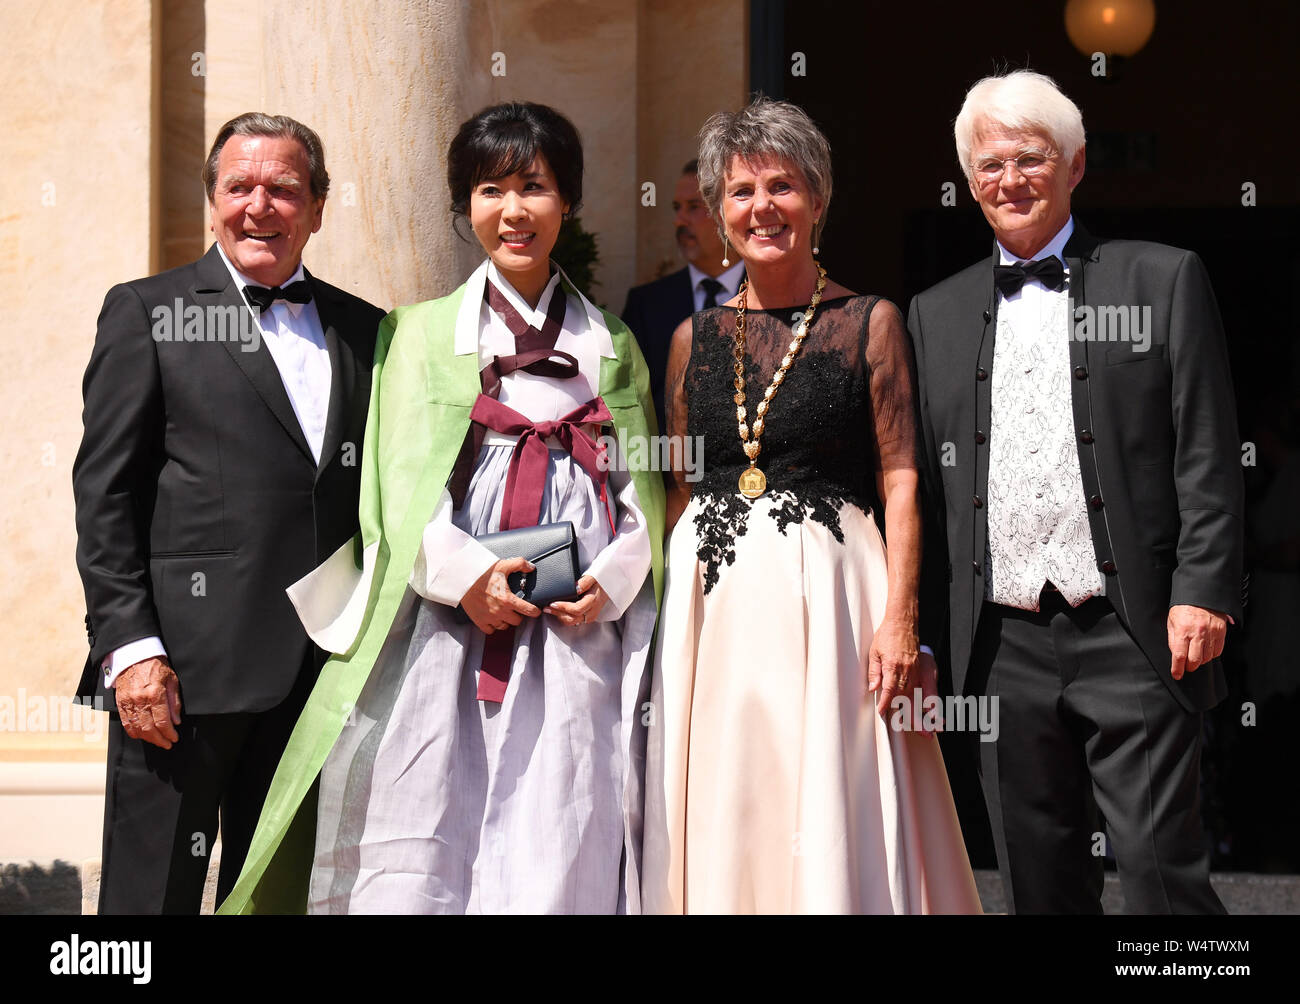 Bayreuth, Germany. 25th July, 2019. The Lord Mayor of Bayreuth Brigitte Merk-Erbe (2nd from right) and her husband Thomas (r) welcome former Chancellor Gerhard Schröder (SPD) and his wife Soyeon Kim to the beginning of the Bayreuth Festival 2019. The Richard Wagner Festival begins in Bayreuth on Thursday. Numerous celebrities are expected on the red carpet. (To dpa 'Bayreuth Festival start in heat with new 'Tannhäuser'') Credit: Tobias Hase/dpa/Alamy Live News Stock Photo